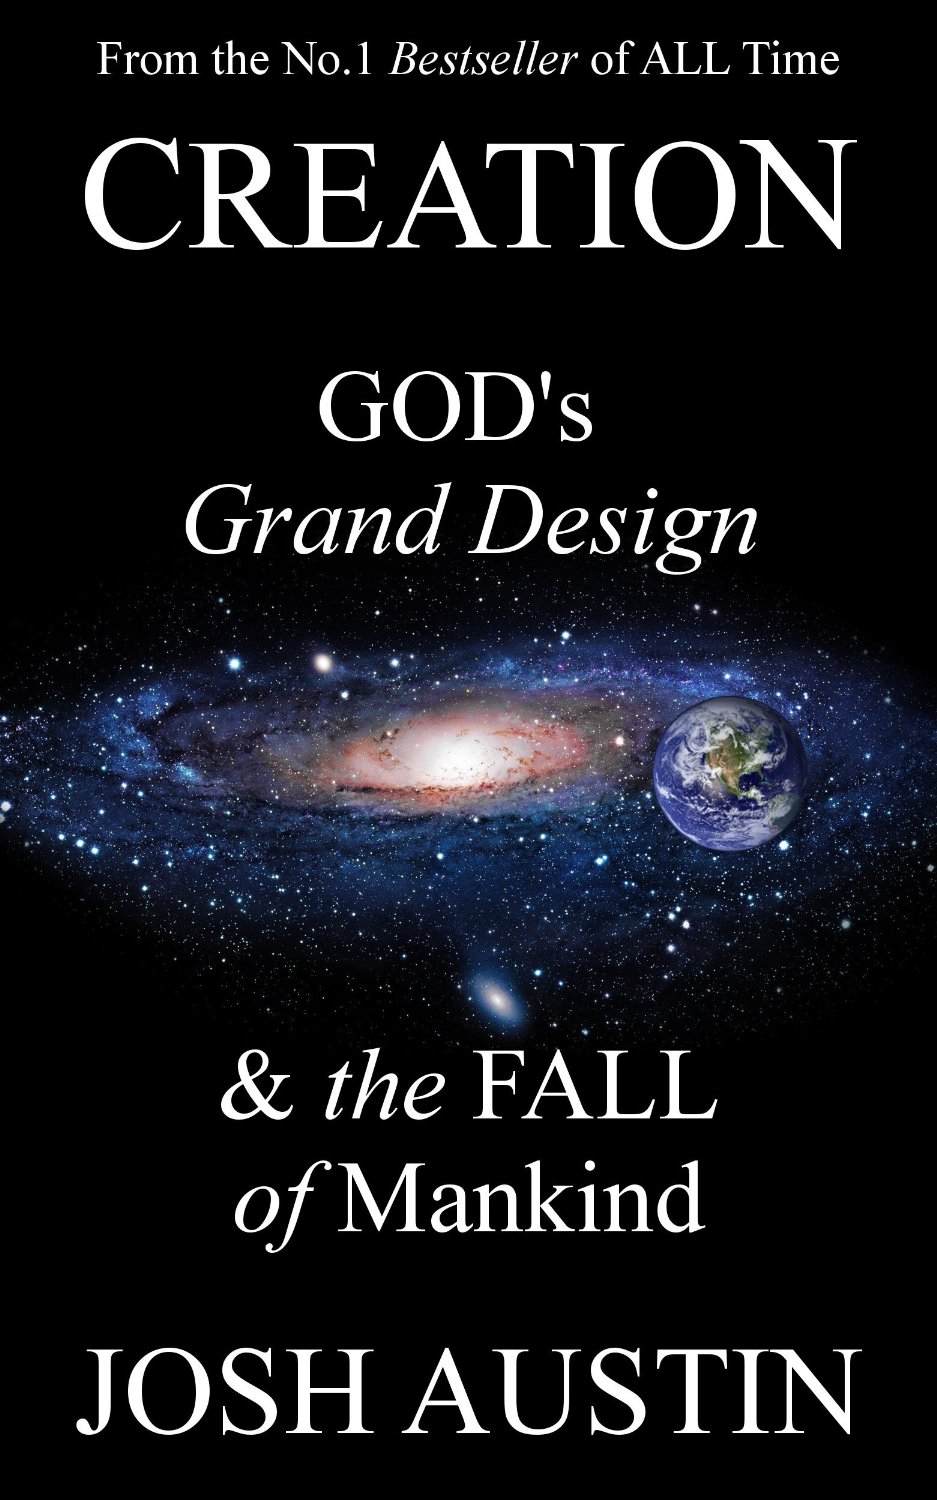 Creation: God’s Grand Design & The Fall of Mankind by Josh Austin